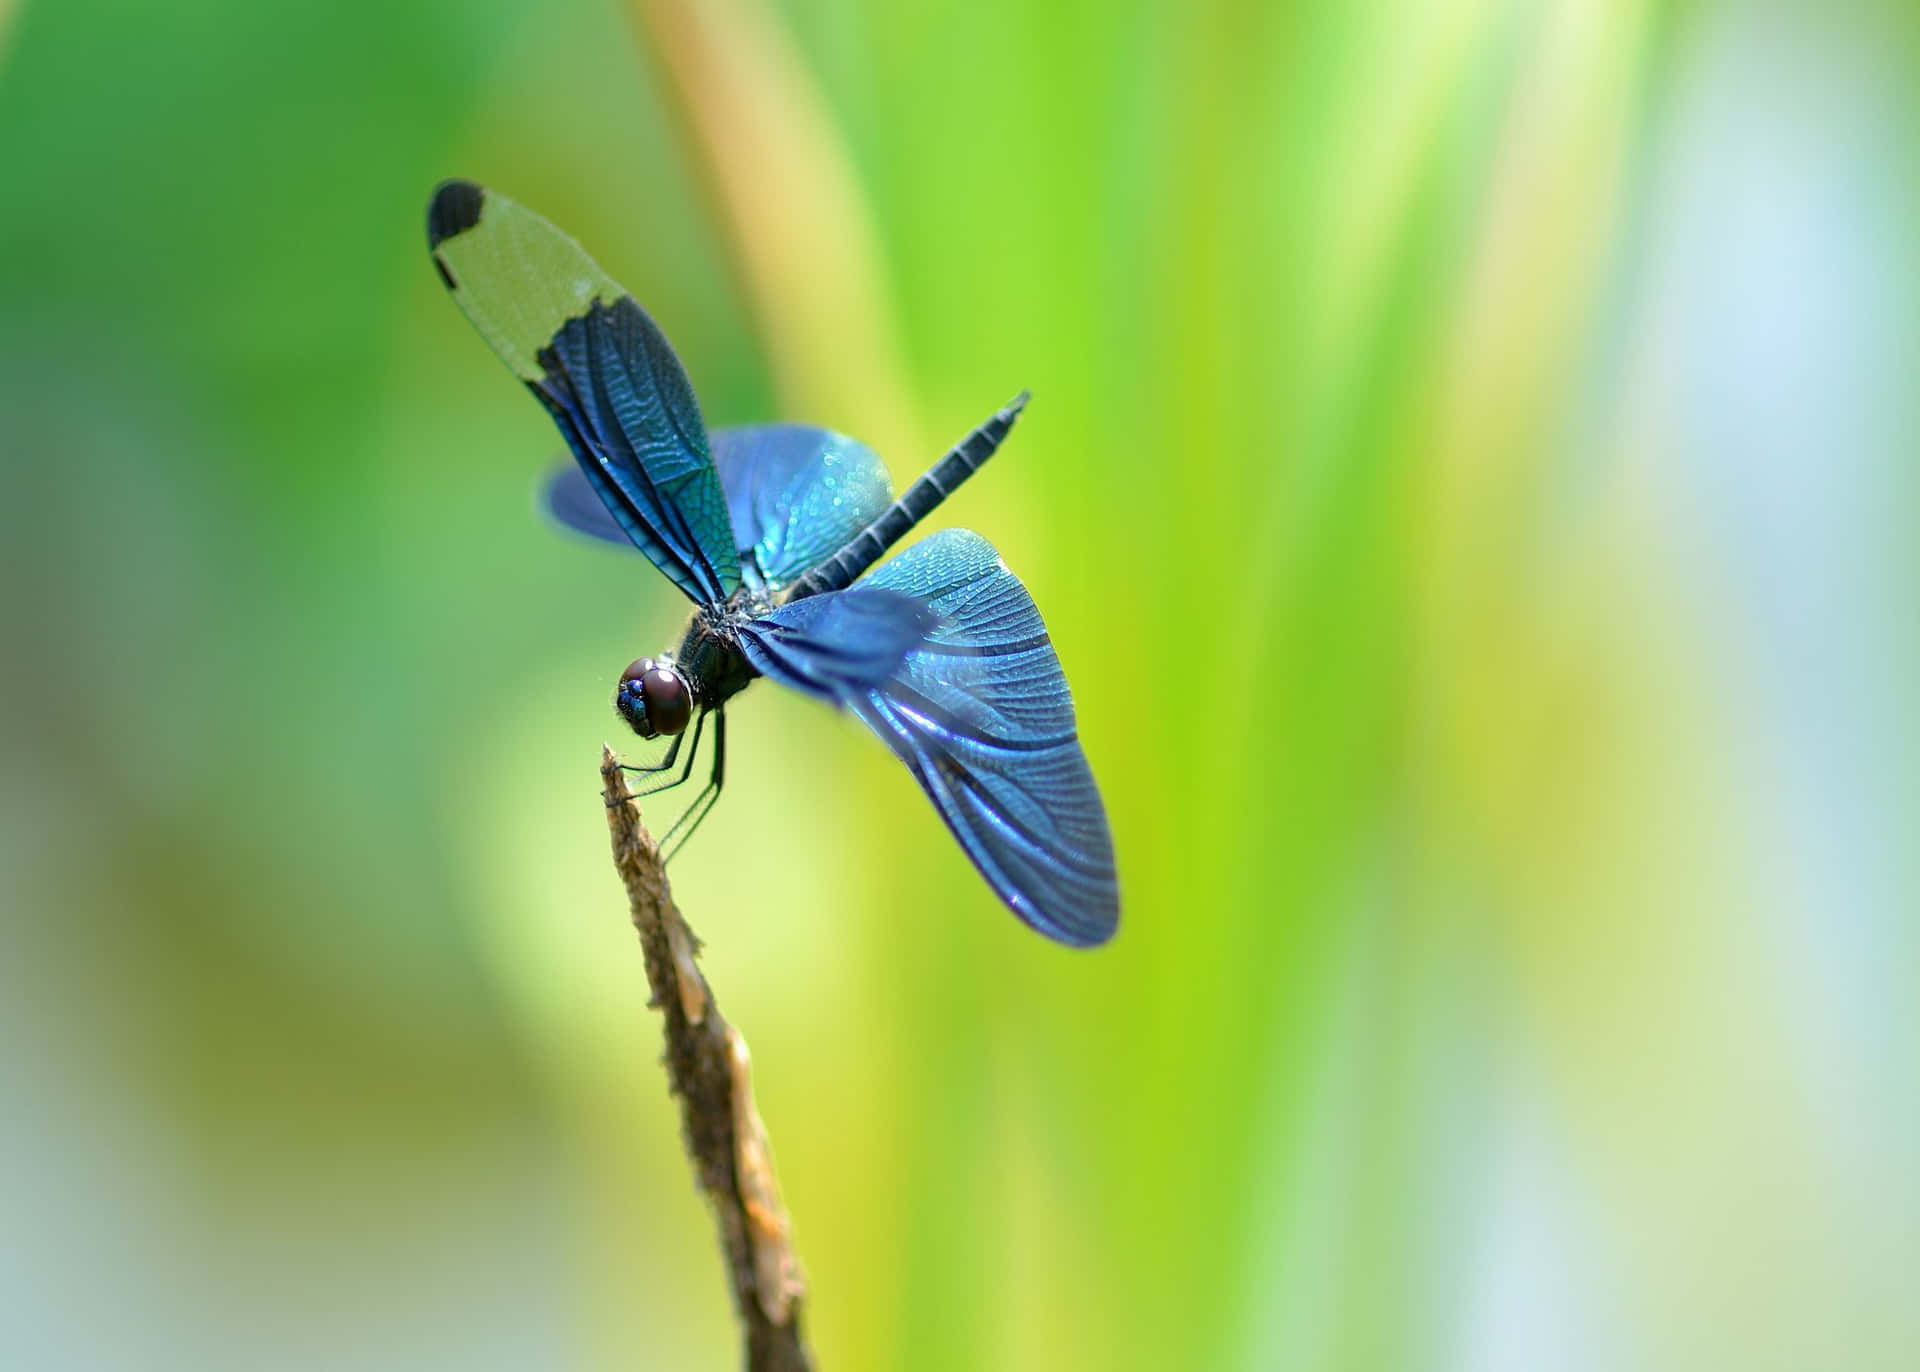 A dragonfly perched on a blade of grass against a summer sky